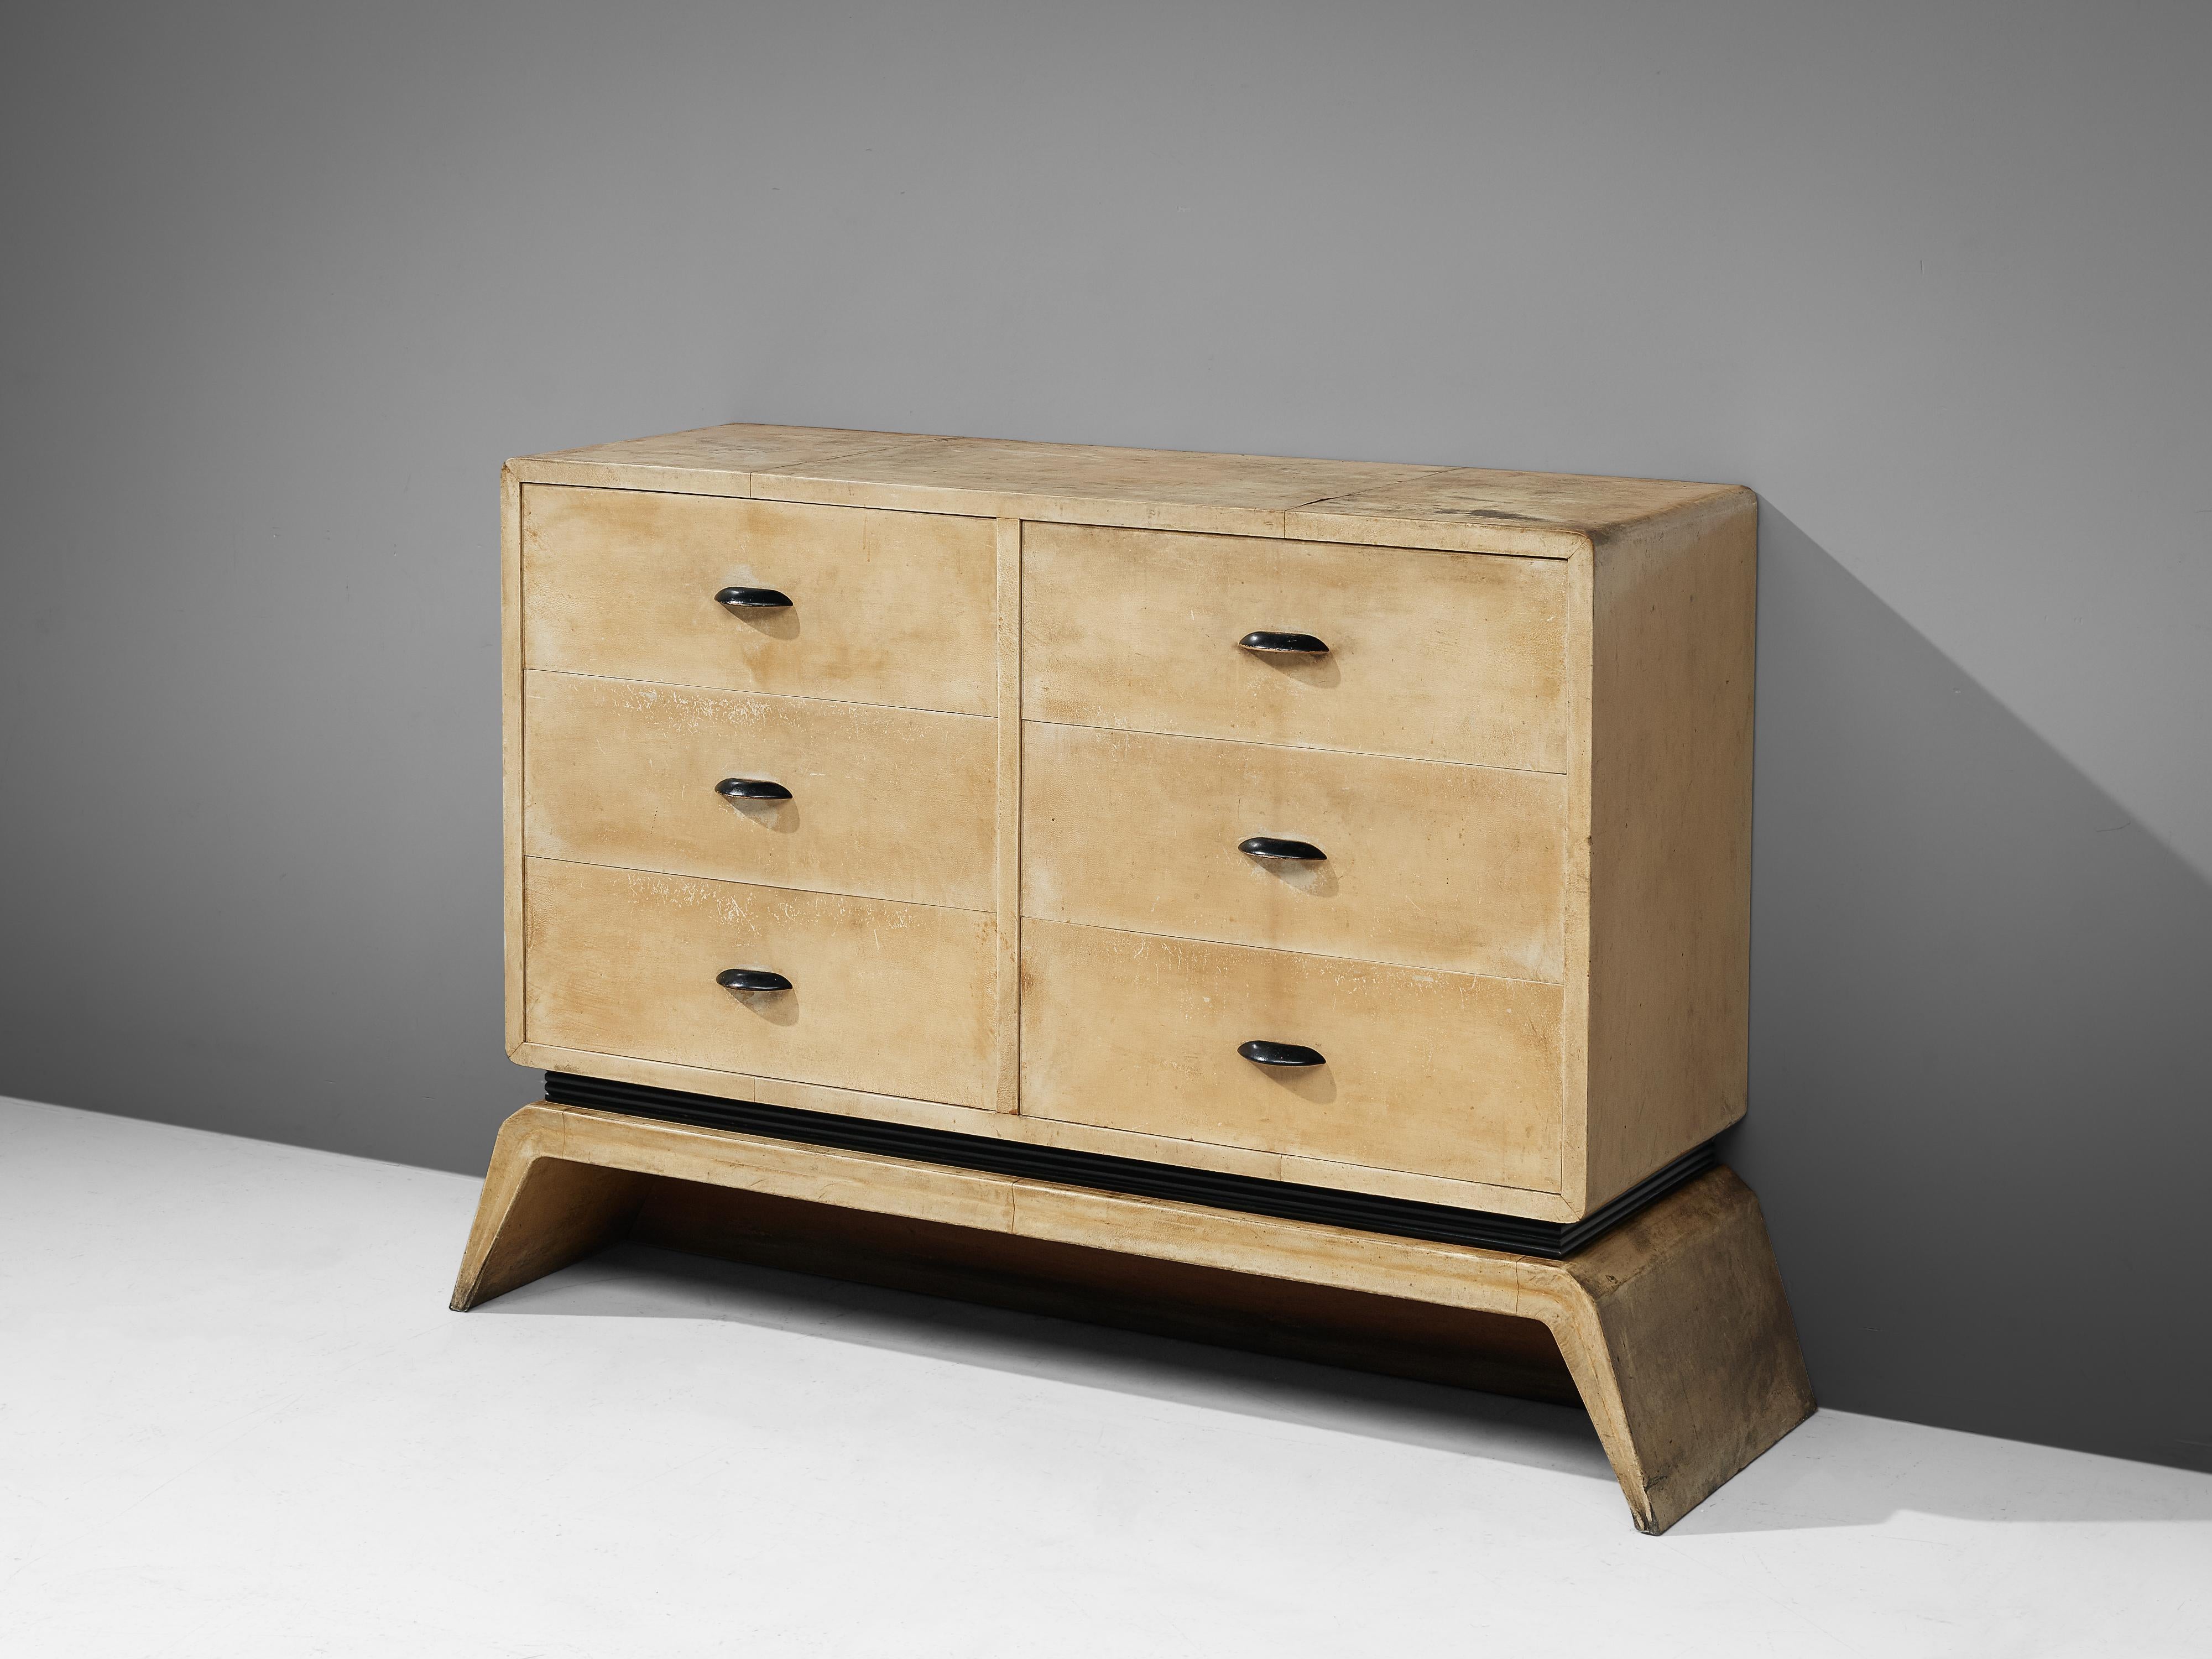 Mid-20th Century Rare Valzania Sideboard wit Drawers in Parchment